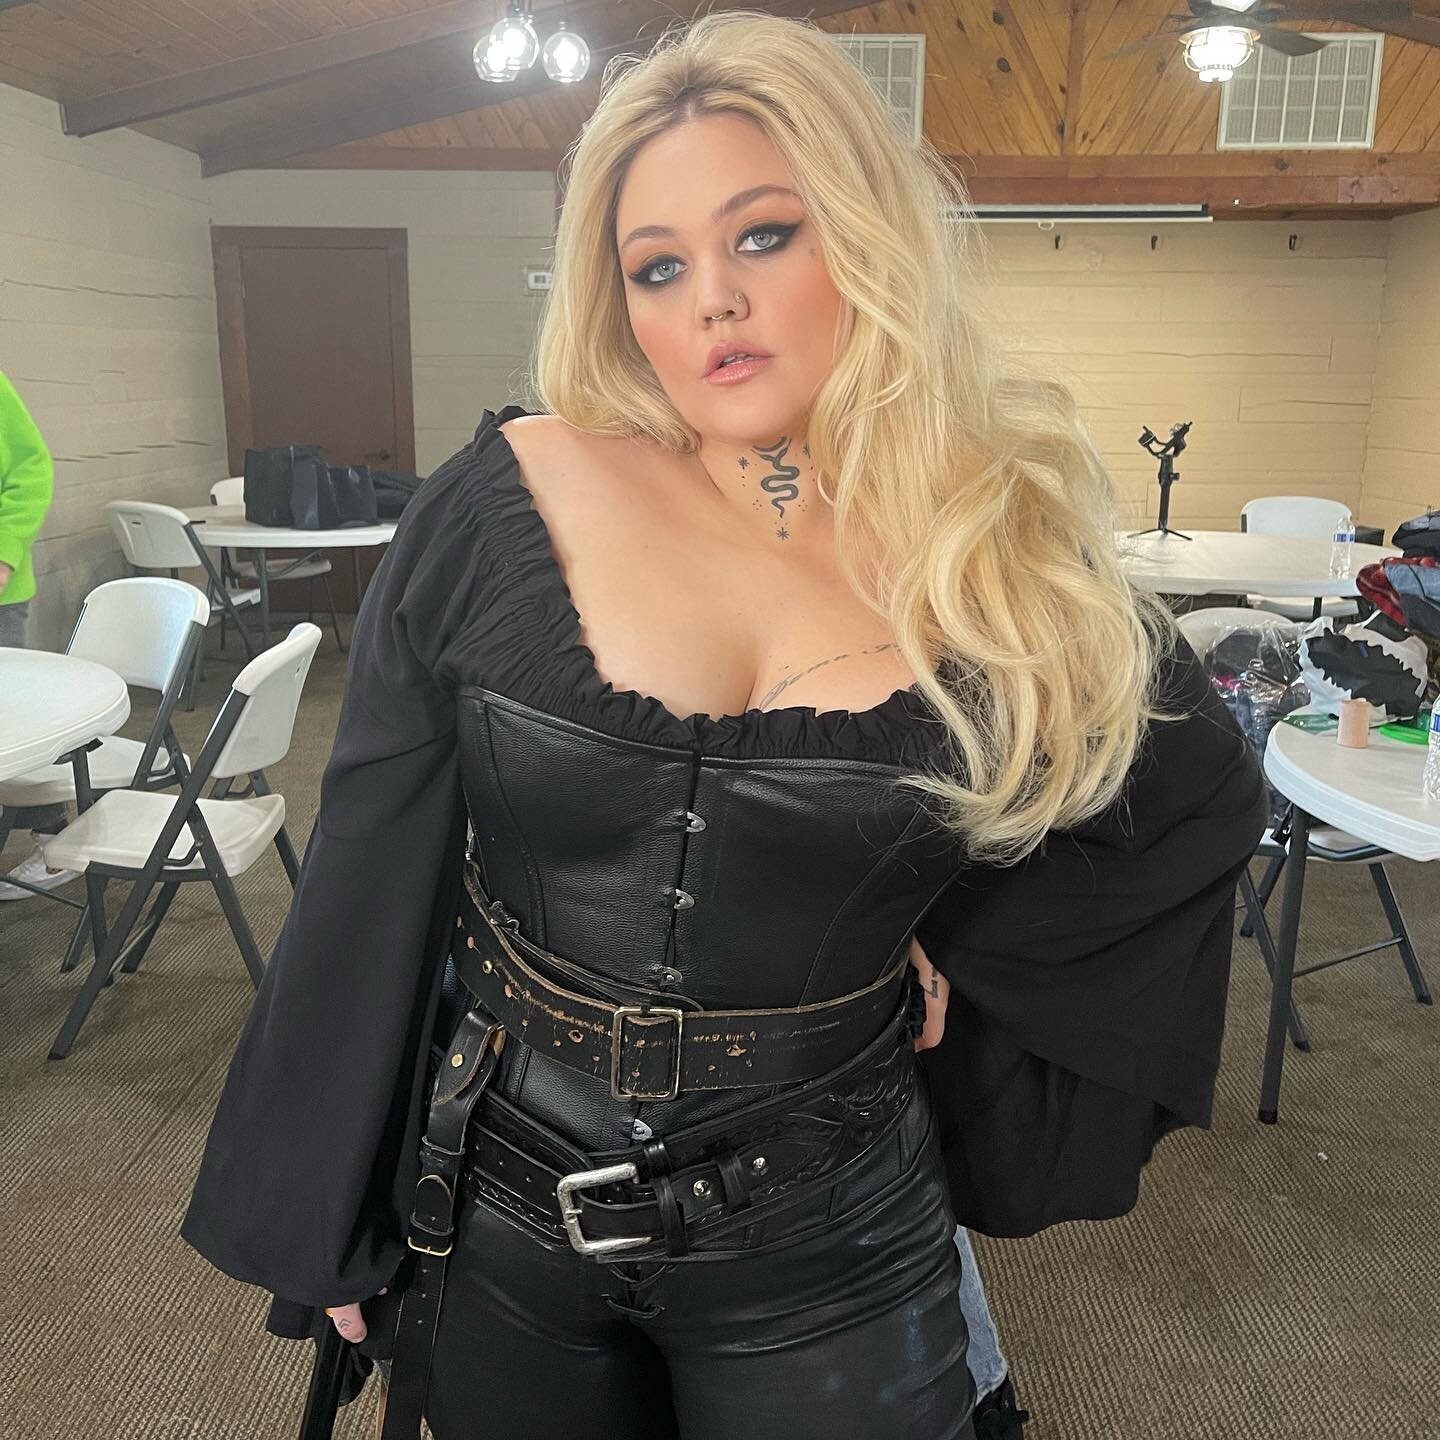 ELLE X WORTH A SHOT VIDEO
An entire ass VIBE&hellip;.brought to you by the one and only @elleking 
Style @tiffanygiffordstyle 
Hair @marwabashirhair
Makeup @tarrynfeldman